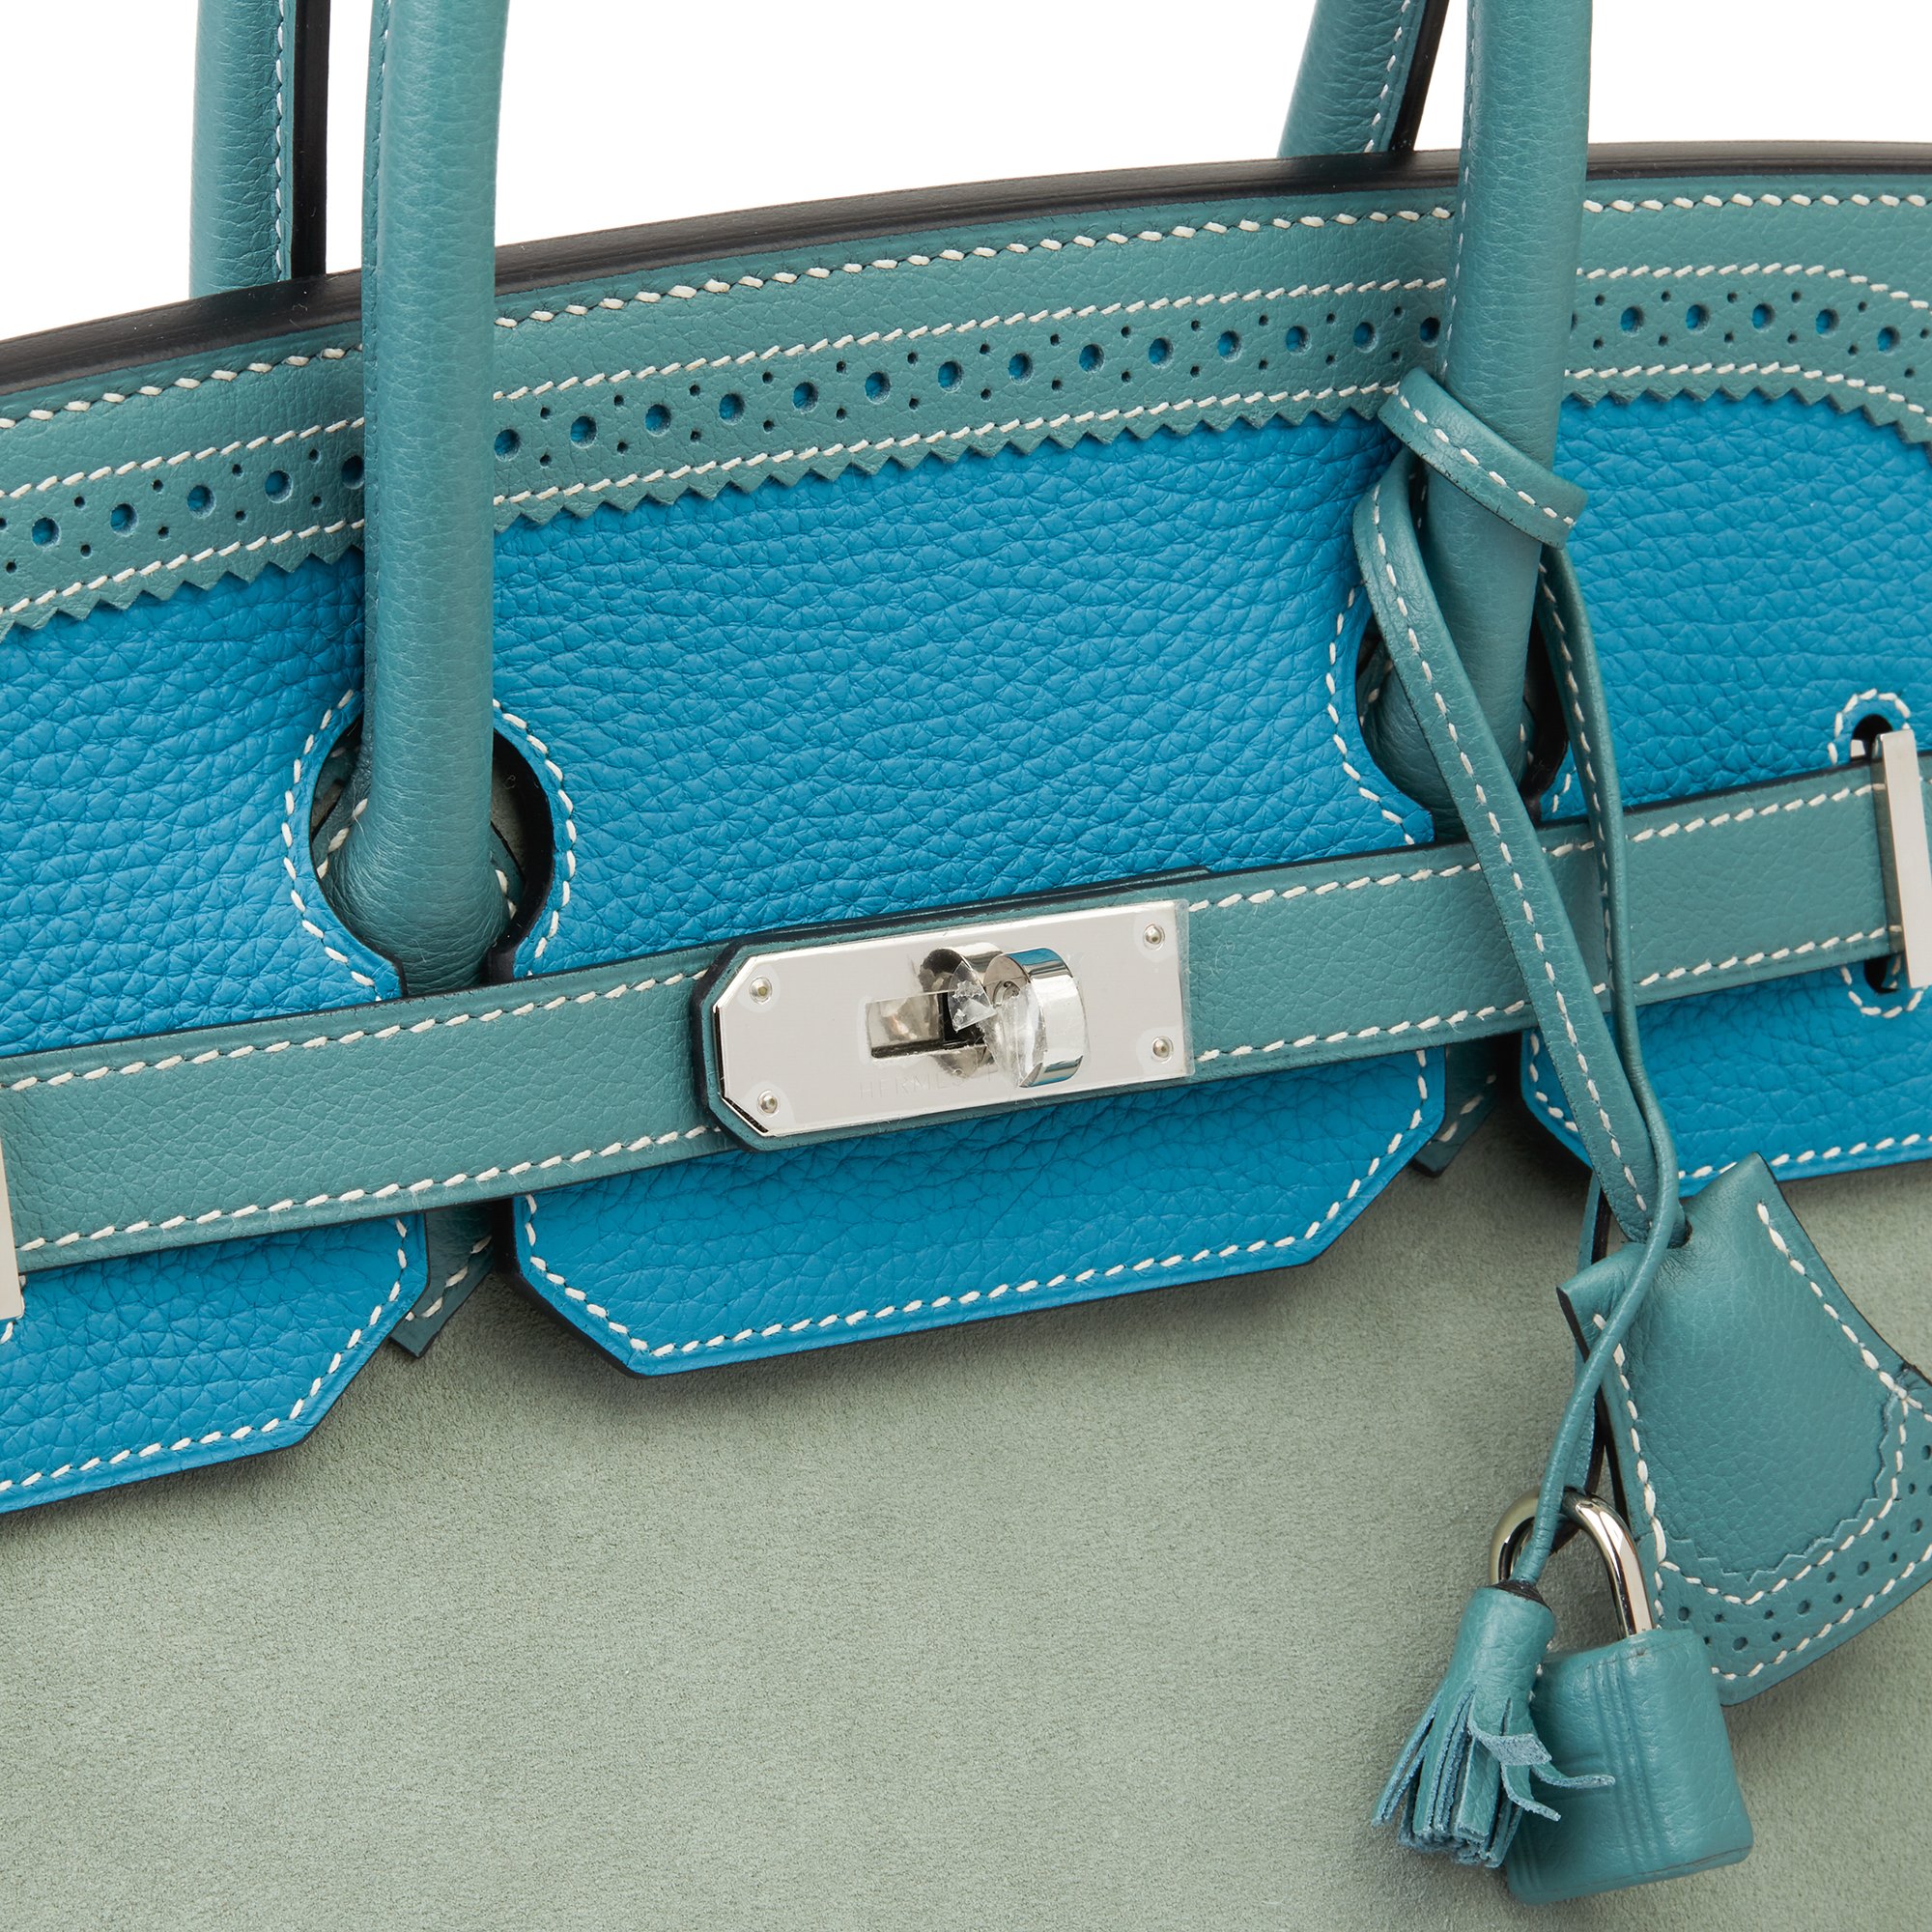 Hermès Turquoise Clemence Leather, Ciel Evercolor Leather & Grizzly Suede Ghillies Birkin 35cm Retourne